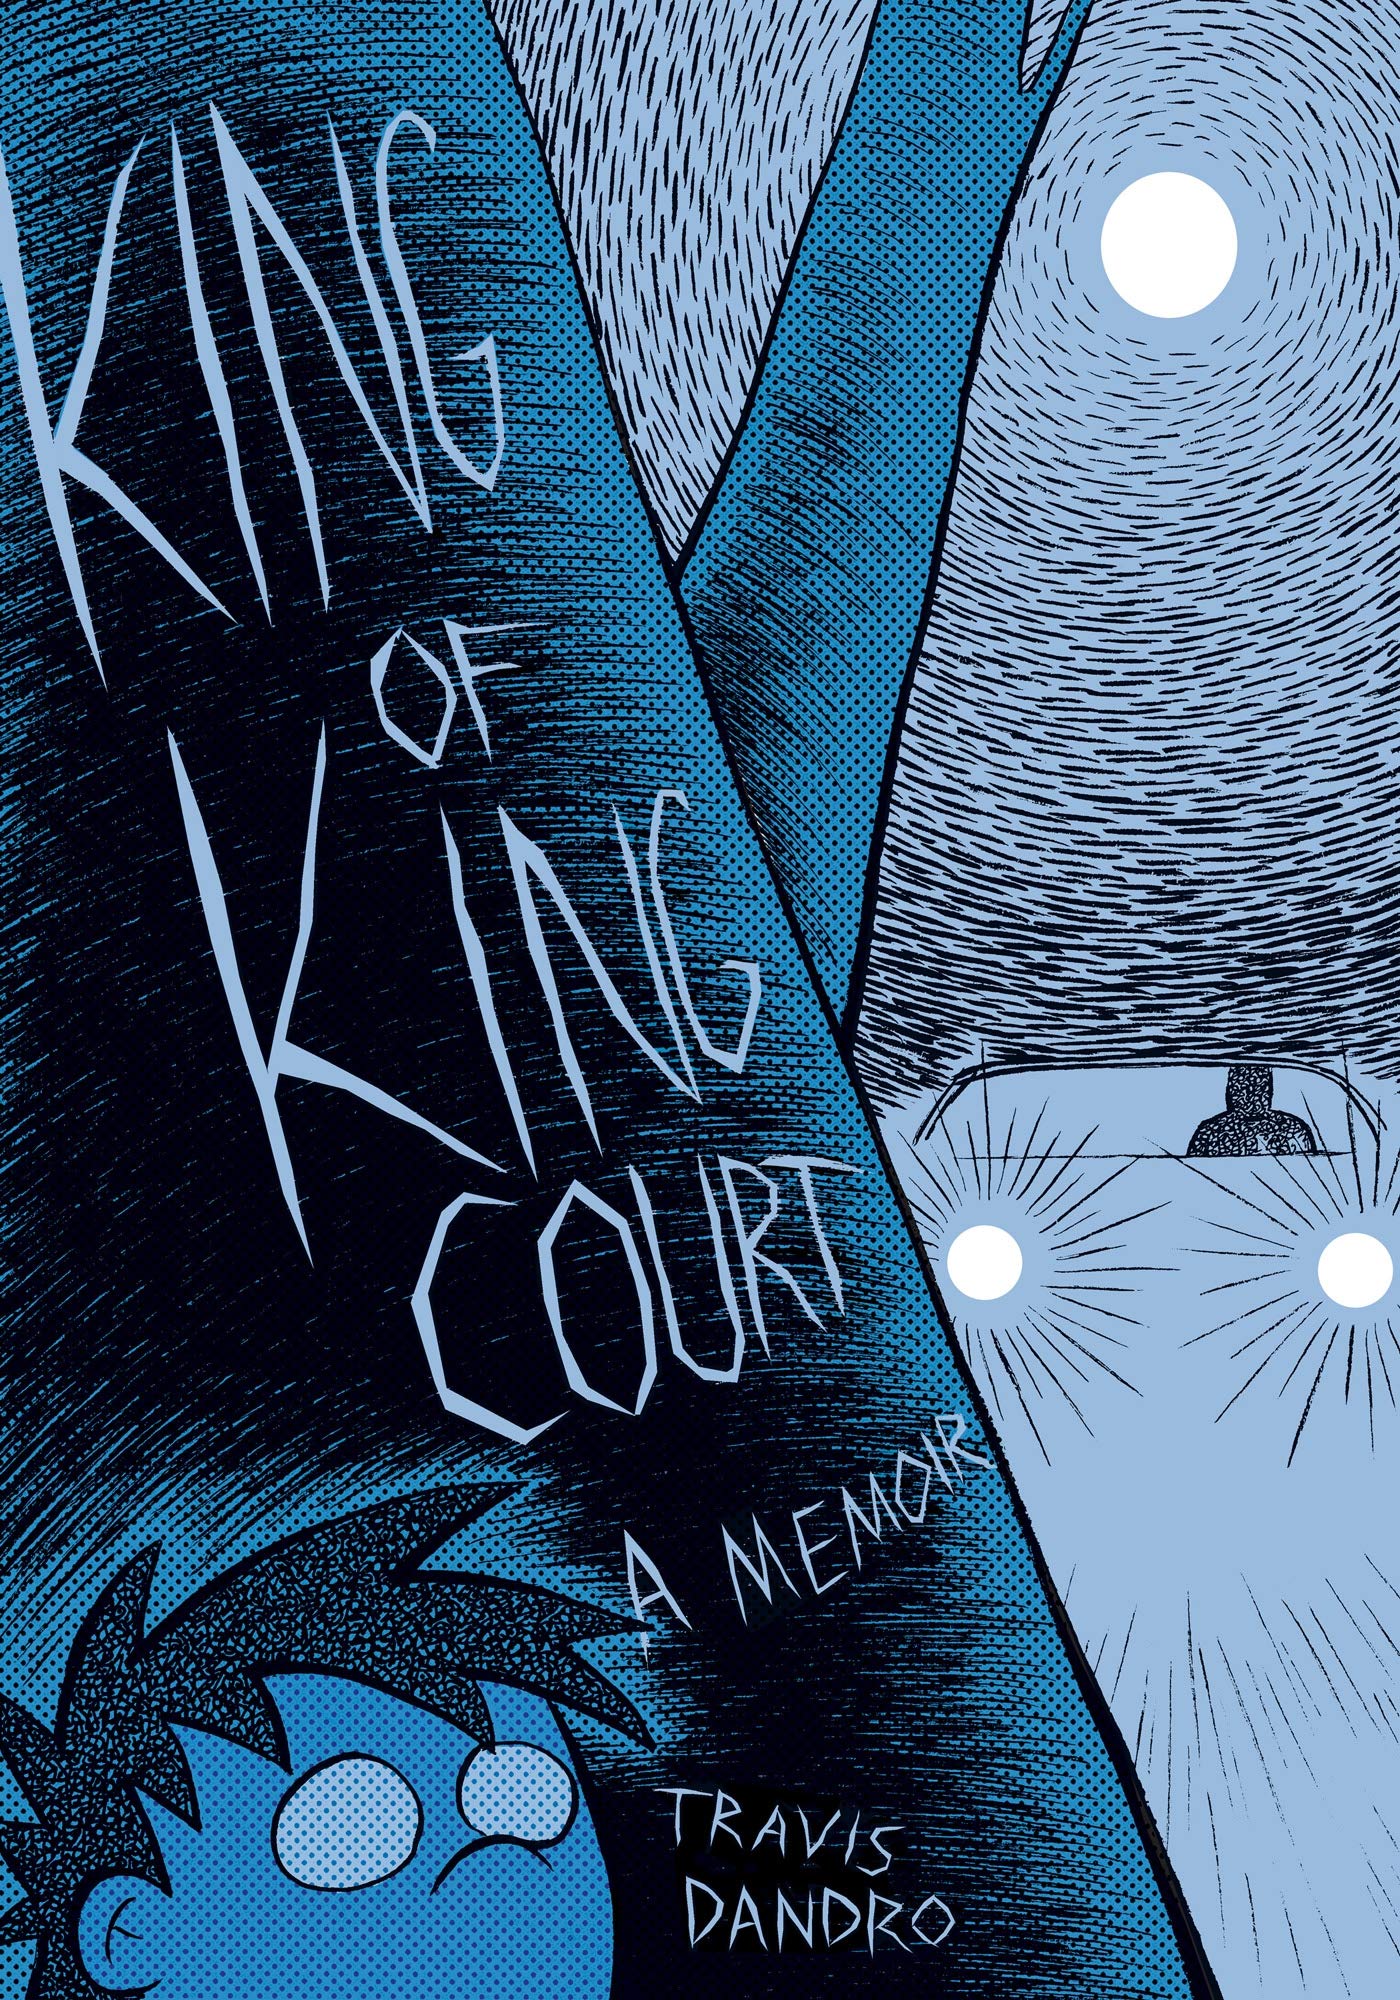 'King of King Court' by Travis Dandro